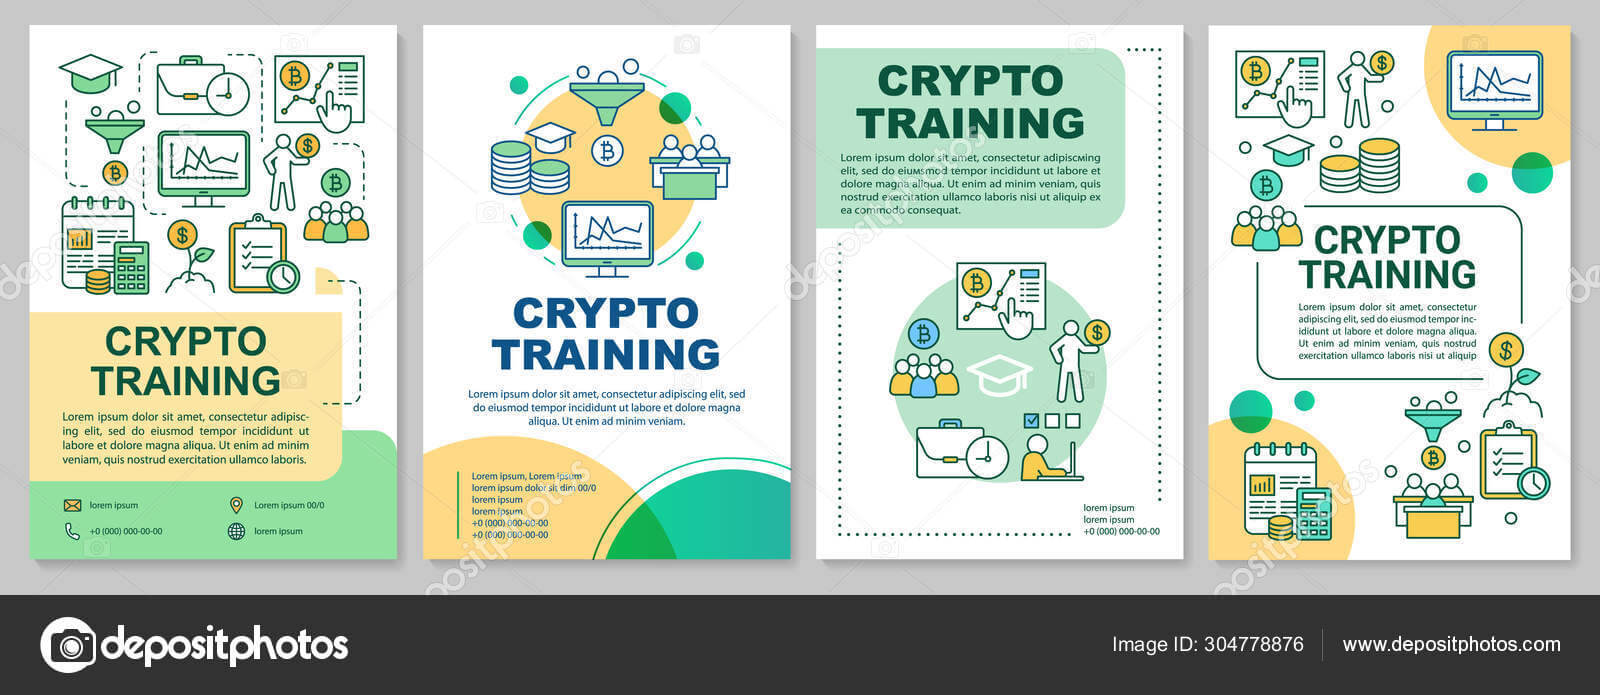 Crypto Training Brochure Template Layout. Cryptocurrency Regarding Training Brochure Template